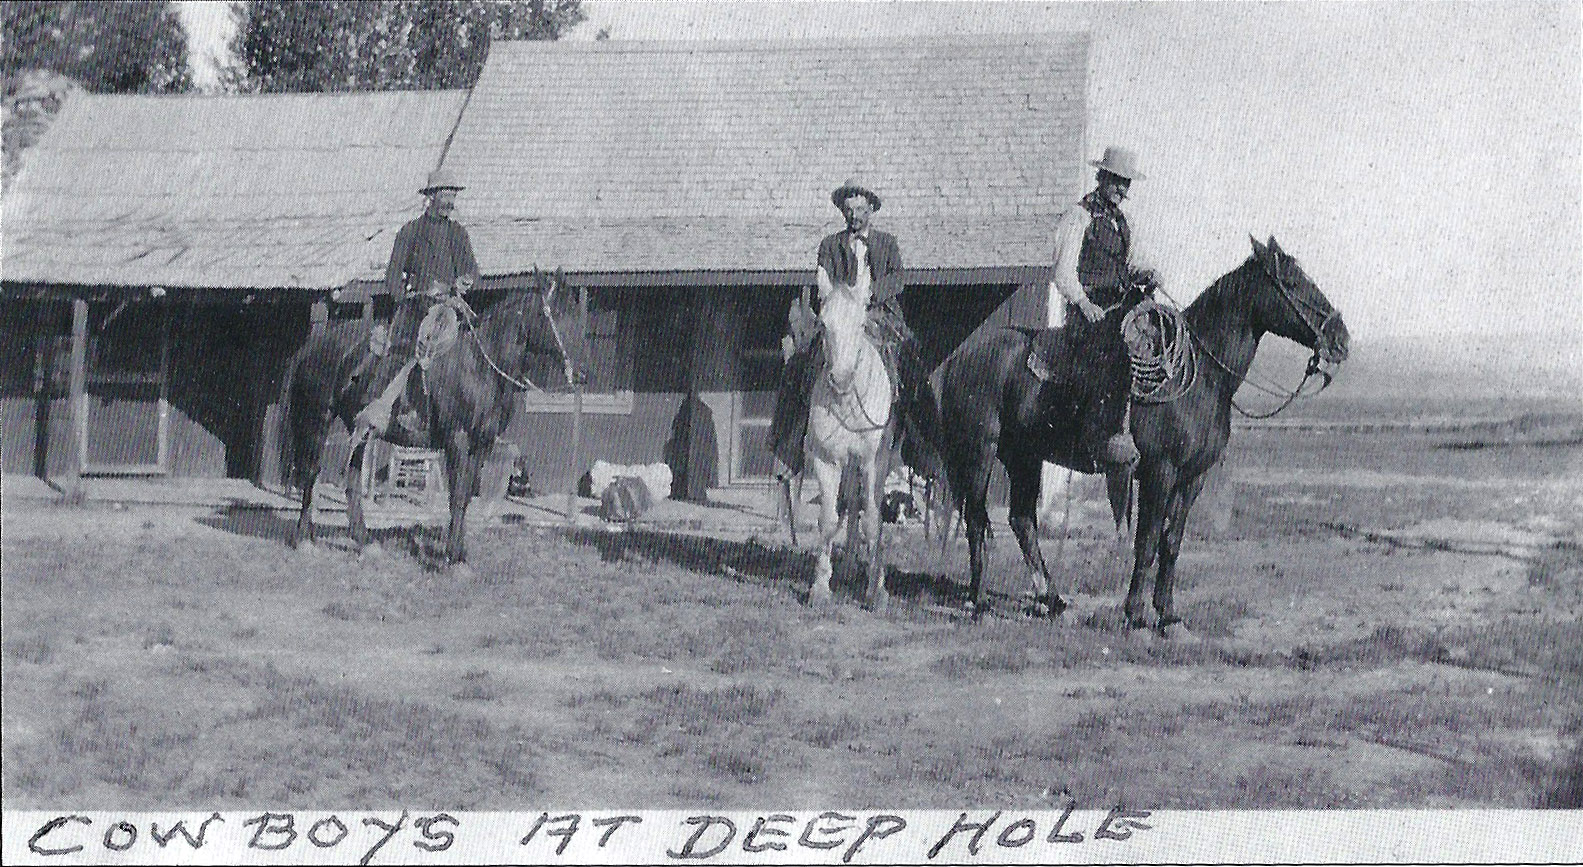 The Deep Hole Ranch was owned by Louis Gerlach 